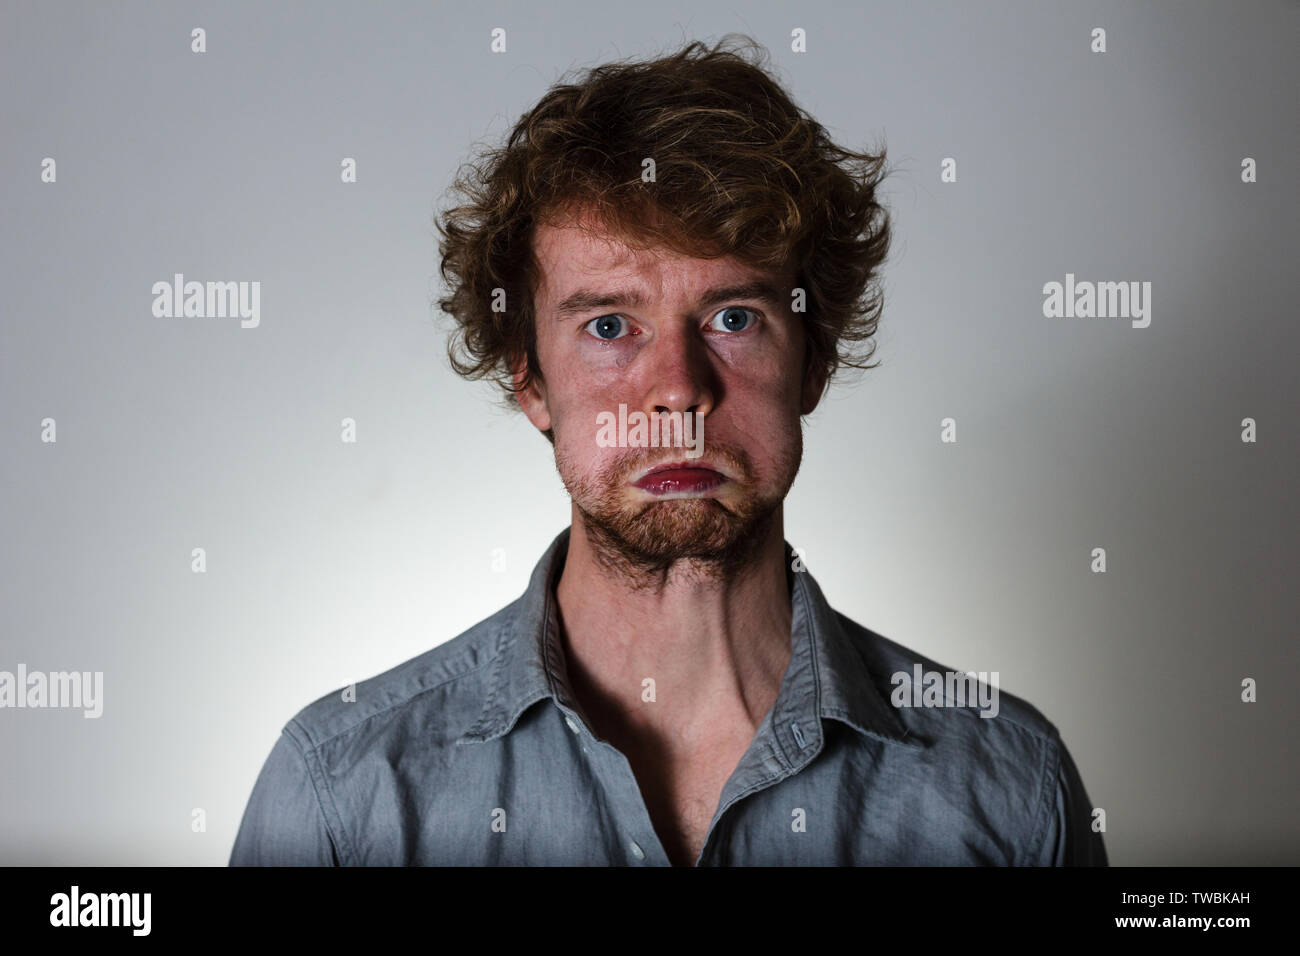 Weird expression young man on gray background Stock Photo